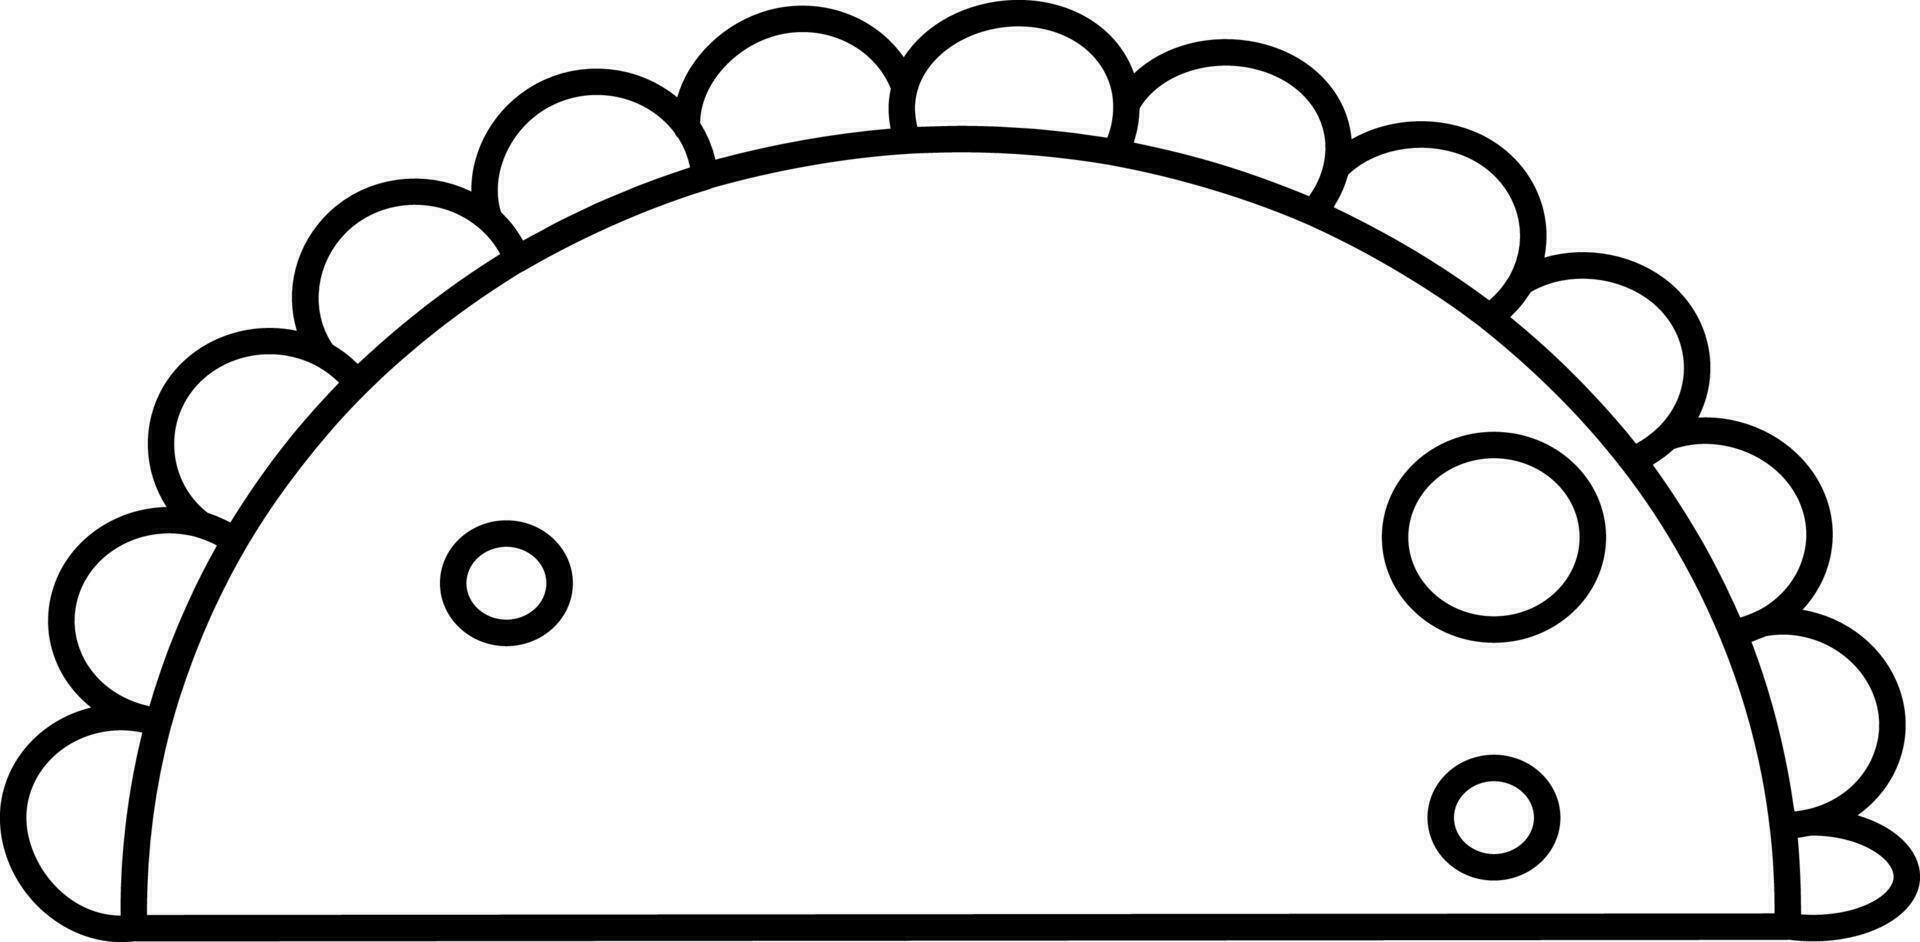 Isolated Gujiya Indian Sweets Icon In Black Outline. vector